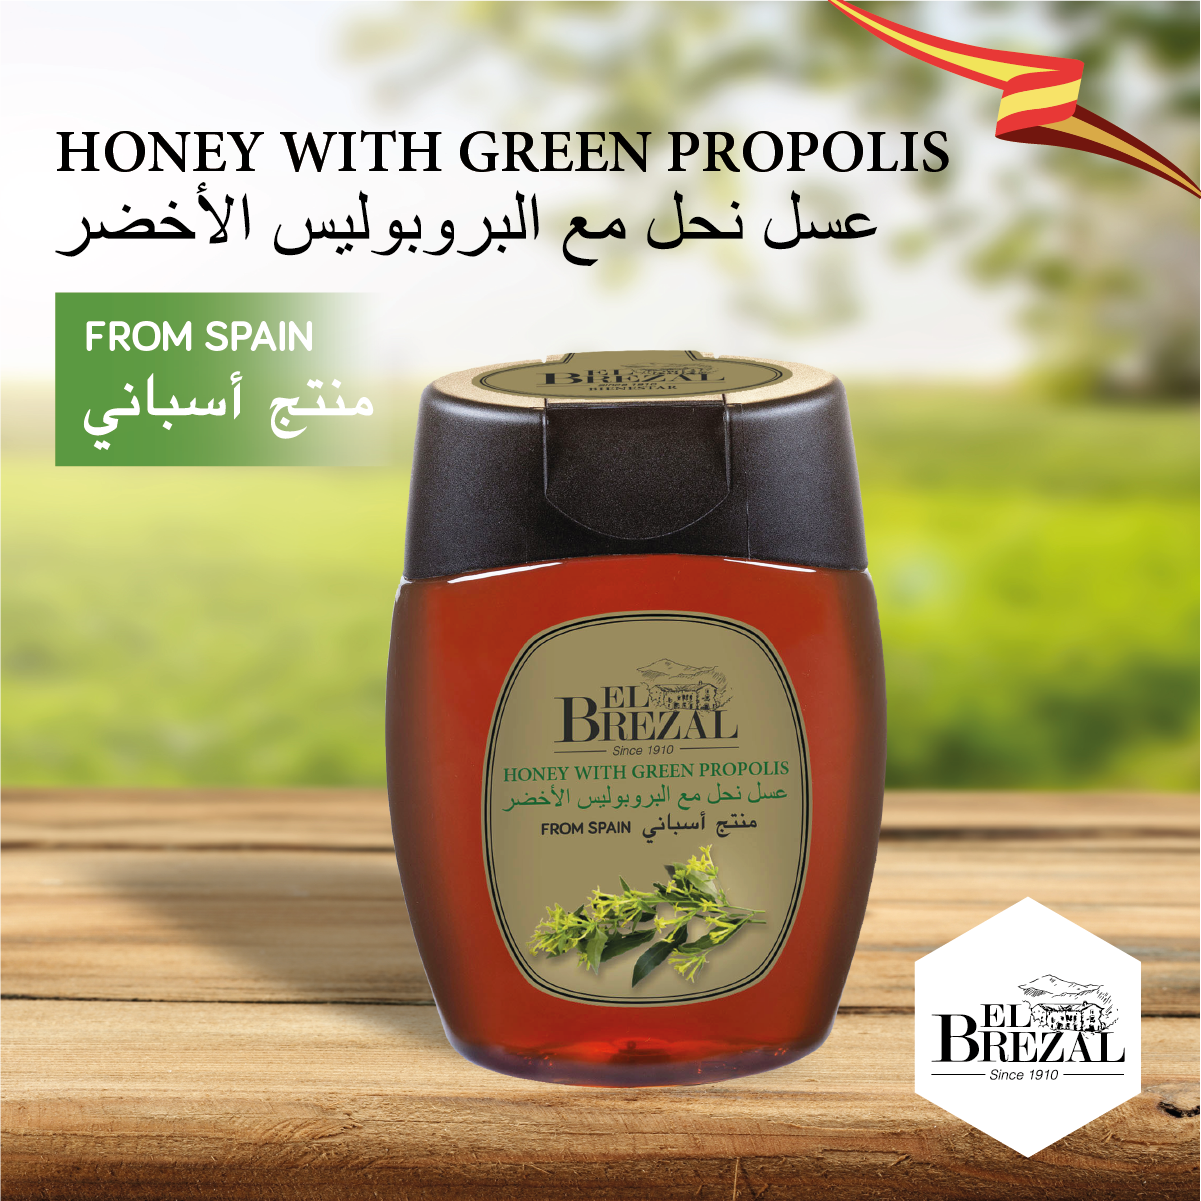 HONEY MIXED WITH PROPOLIS